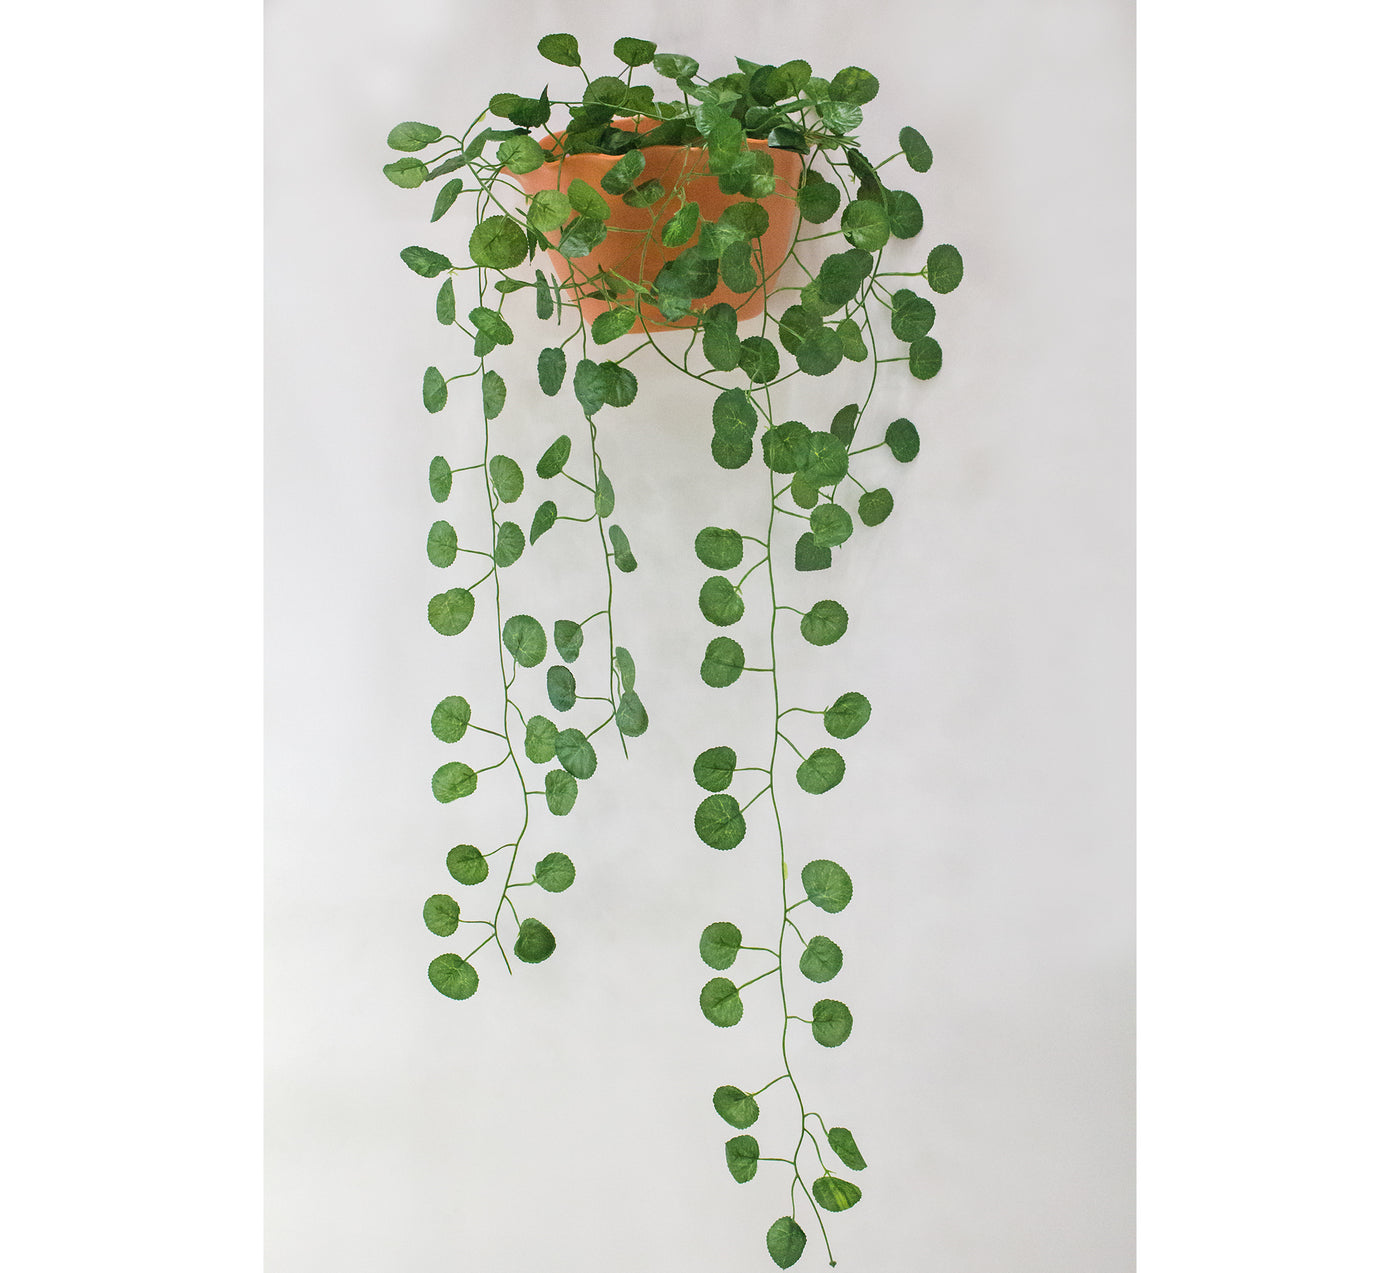 Stunning Artificial Creeper Green Begonia Garland | Home Décor Large (Pack of 3 Strings, 6 feet)